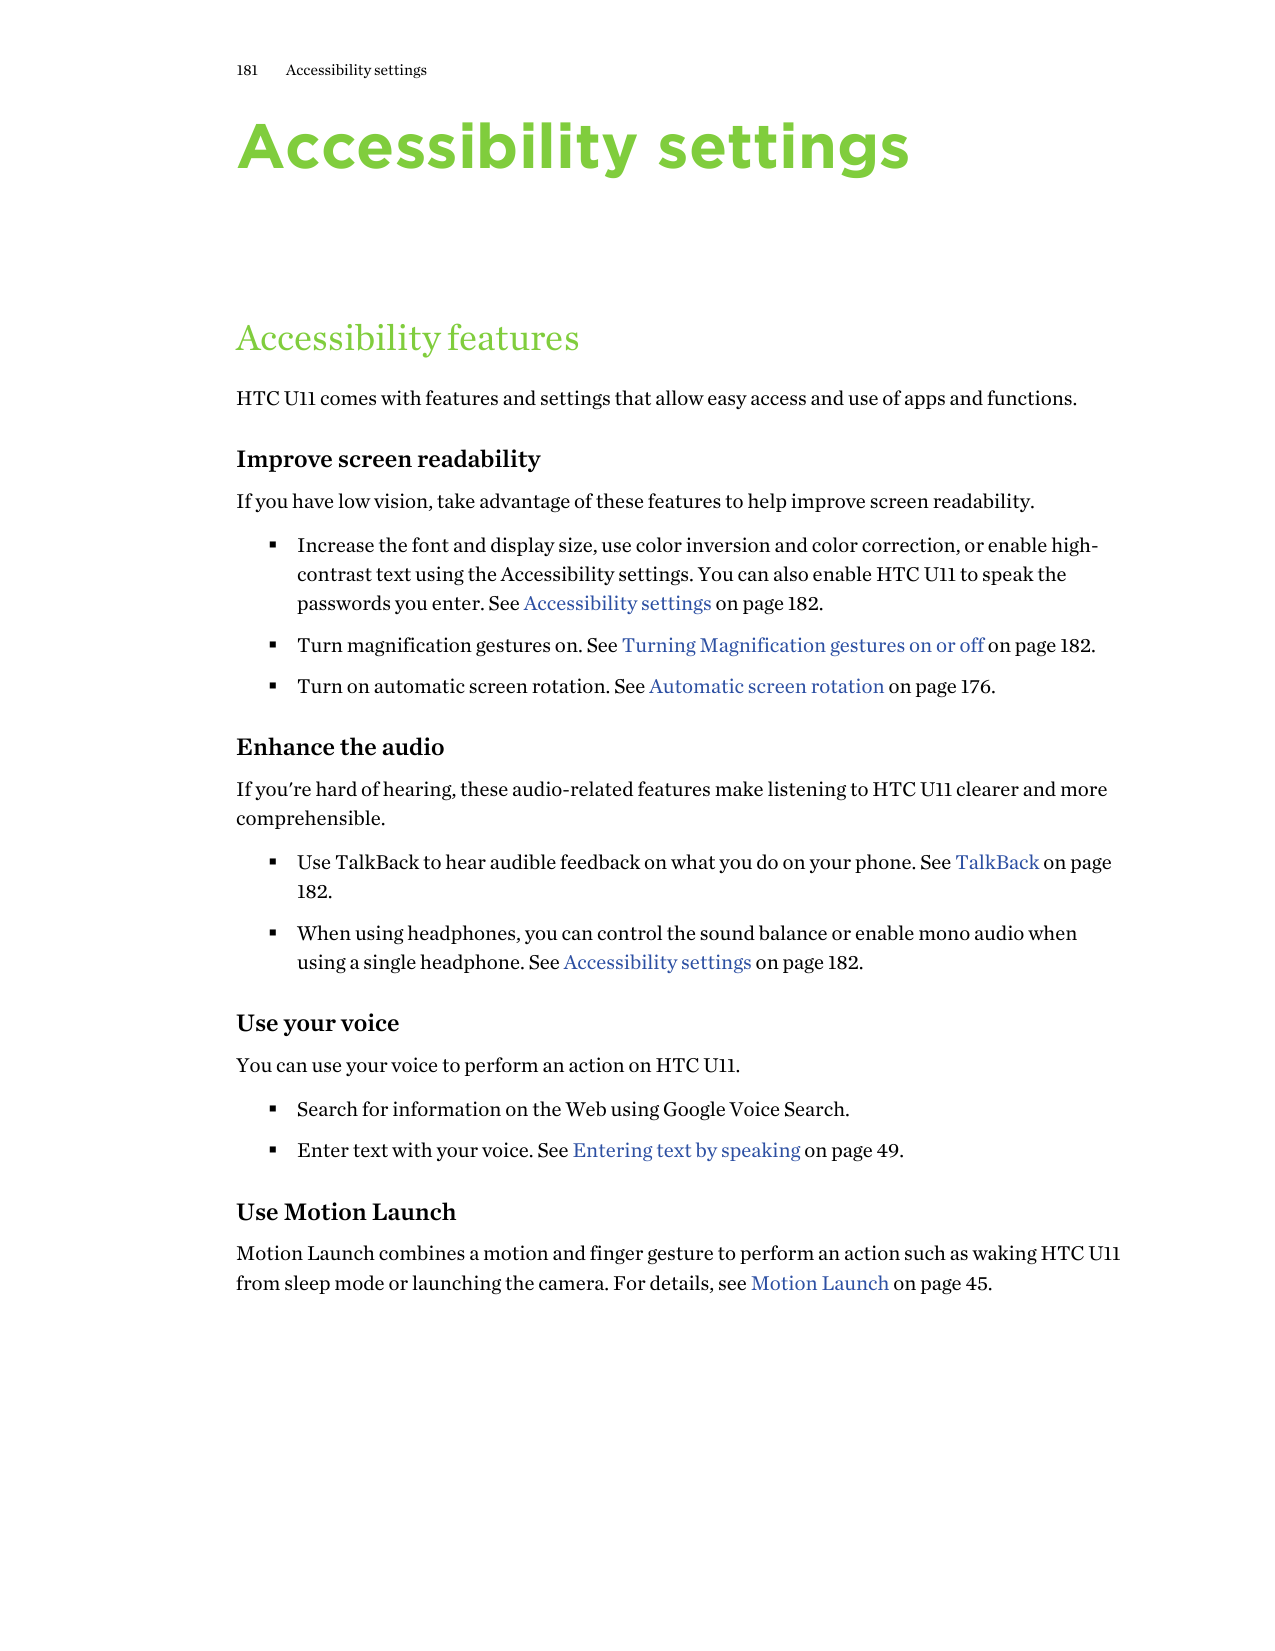 181Accessibility settingsAccessibility settingsAccessibility featuresHTC U11 comes with features and settings that allow easy ac